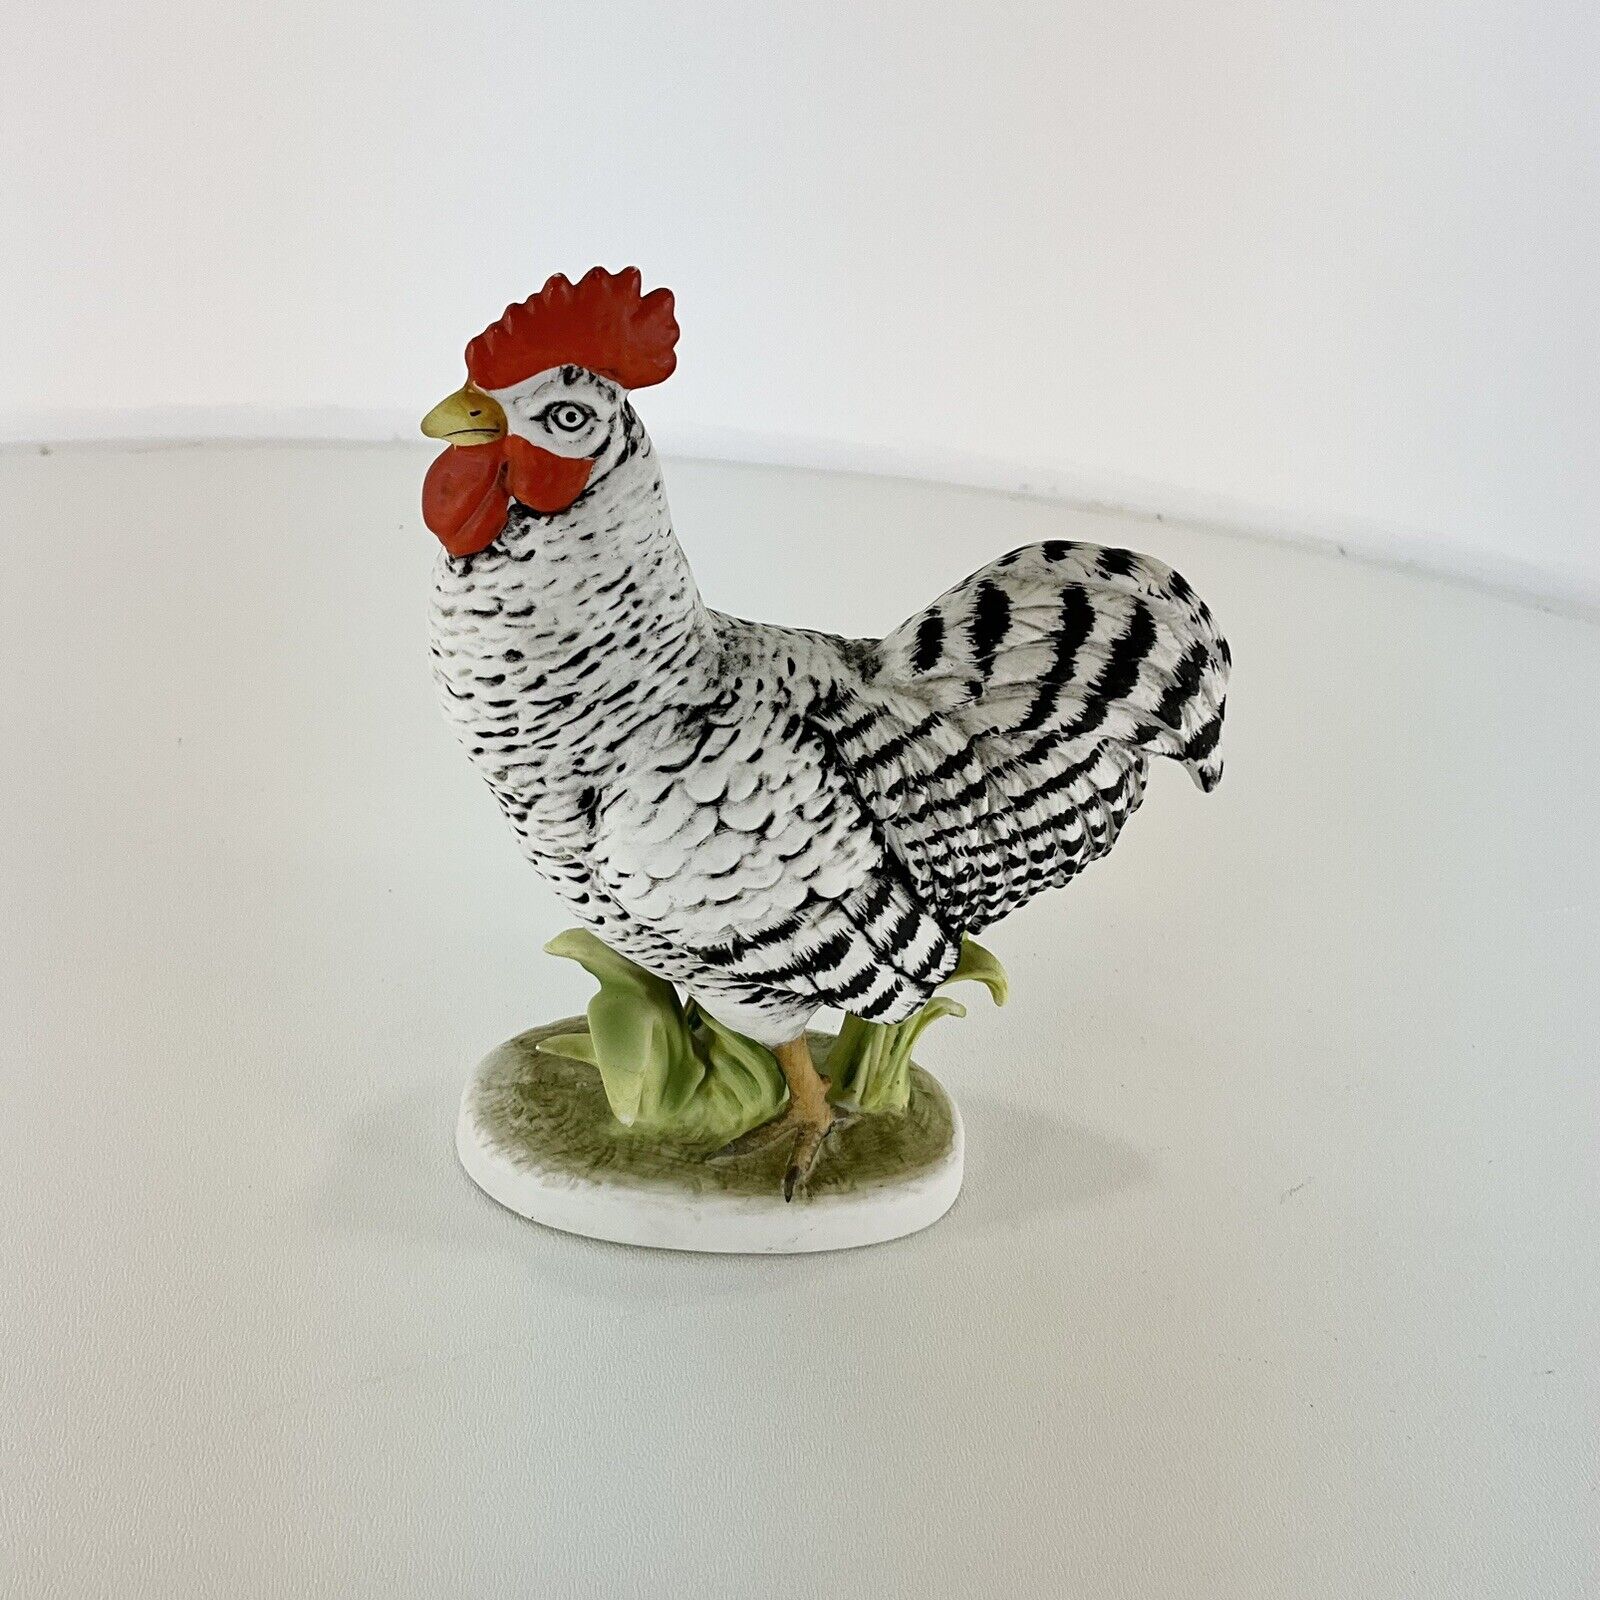 Vintage Lefton Rooster Ceramic Figurine Plymouth Rock Chicken Farm Collectible